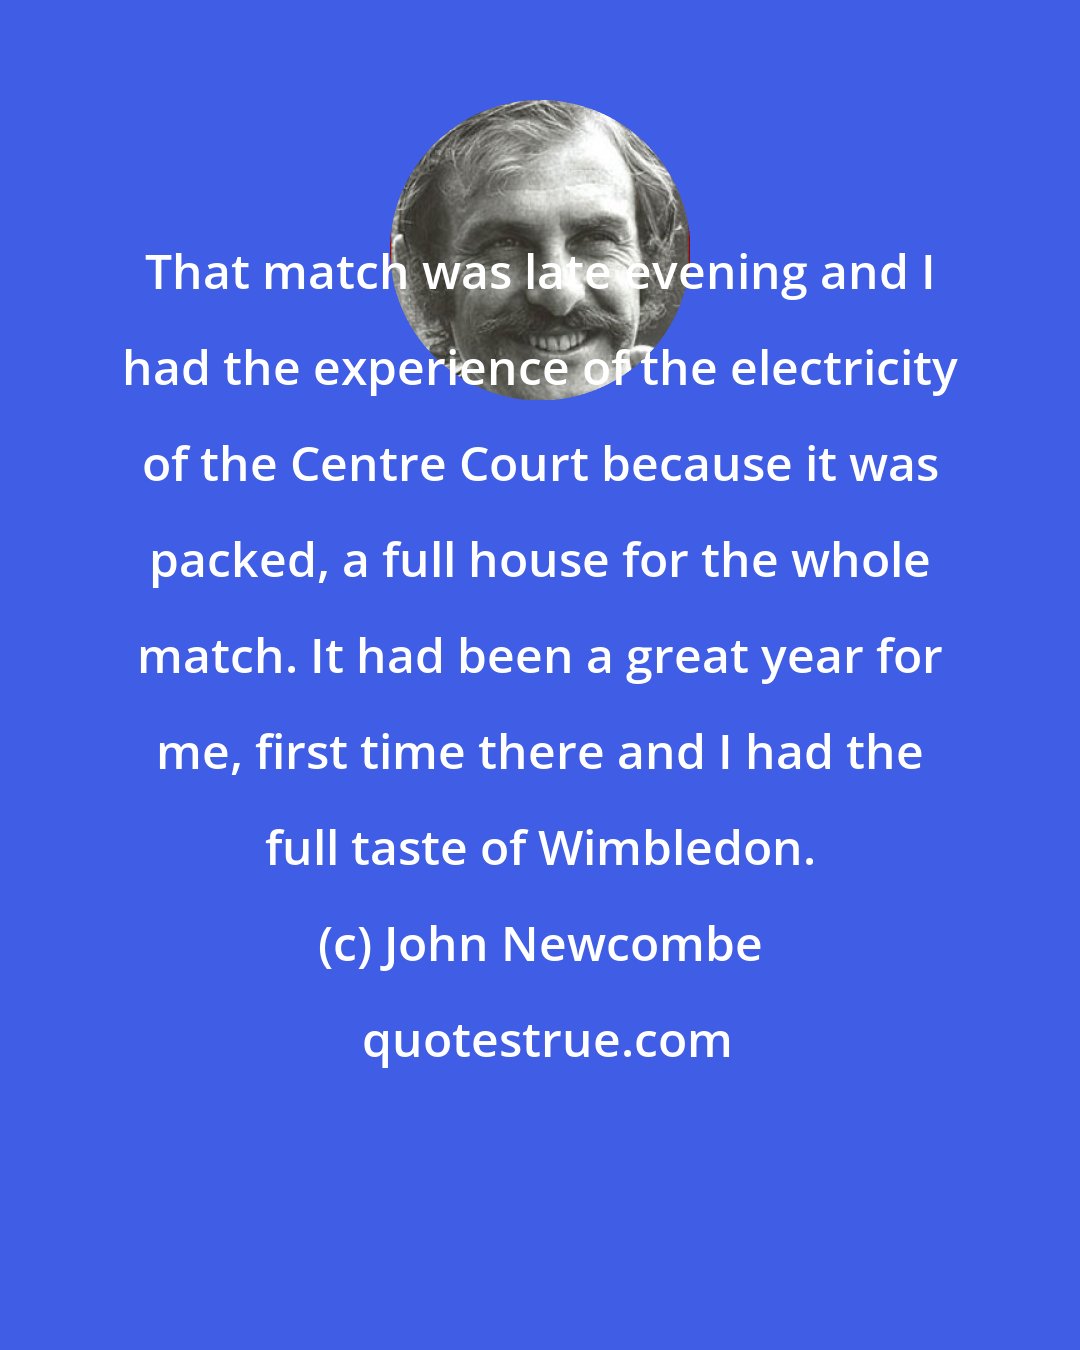 John Newcombe: That match was late evening and I had the experience of the electricity of the Centre Court because it was packed, a full house for the whole match. It had been a great year for me, first time there and I had the full taste of Wimbledon.